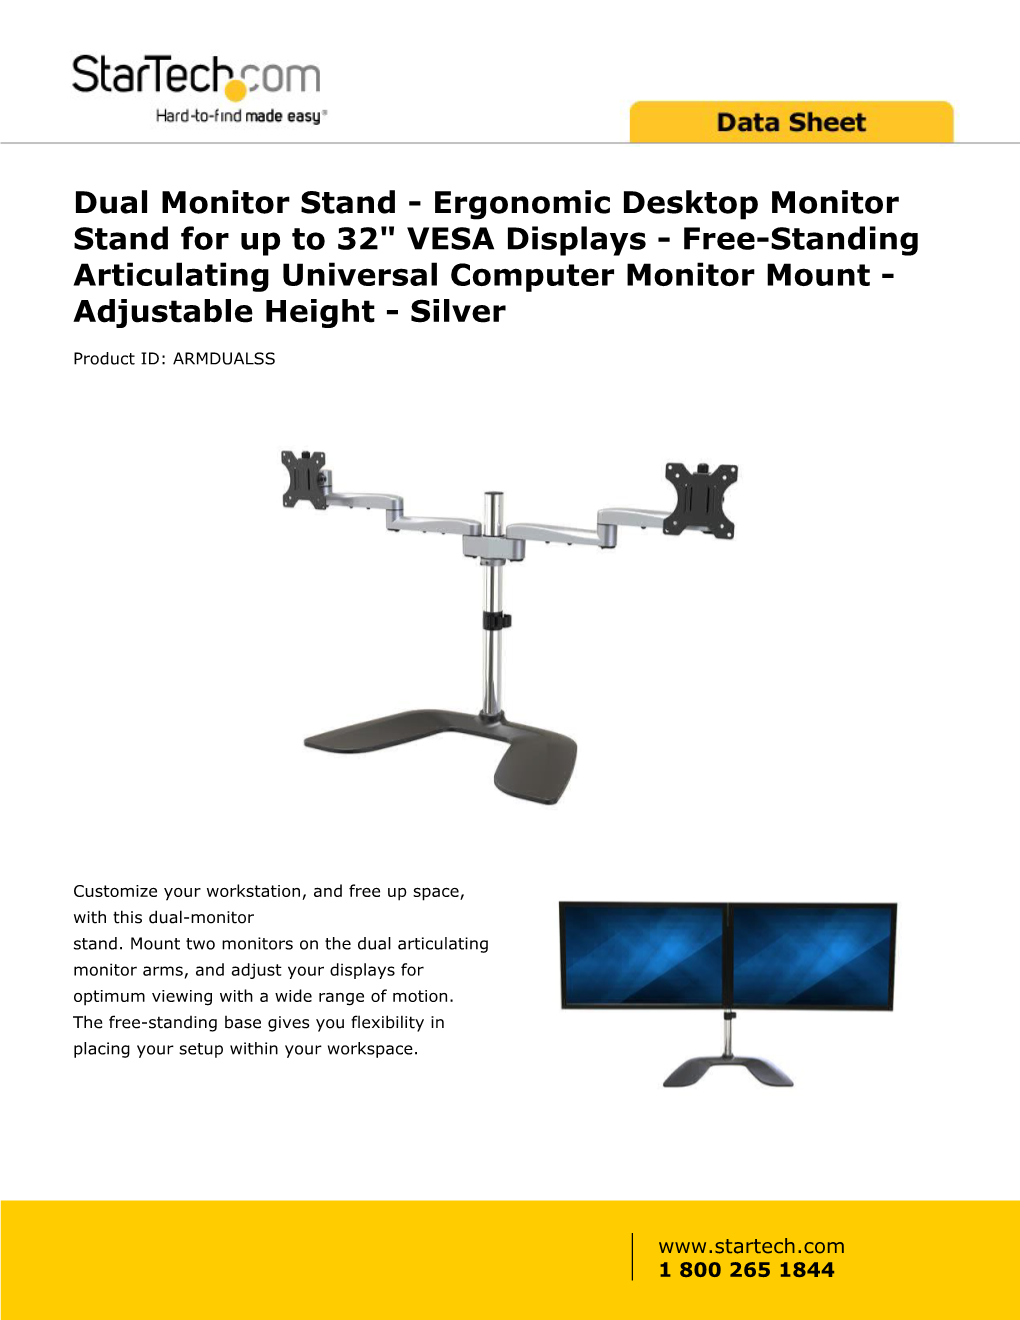 Dual-Monitor Stand